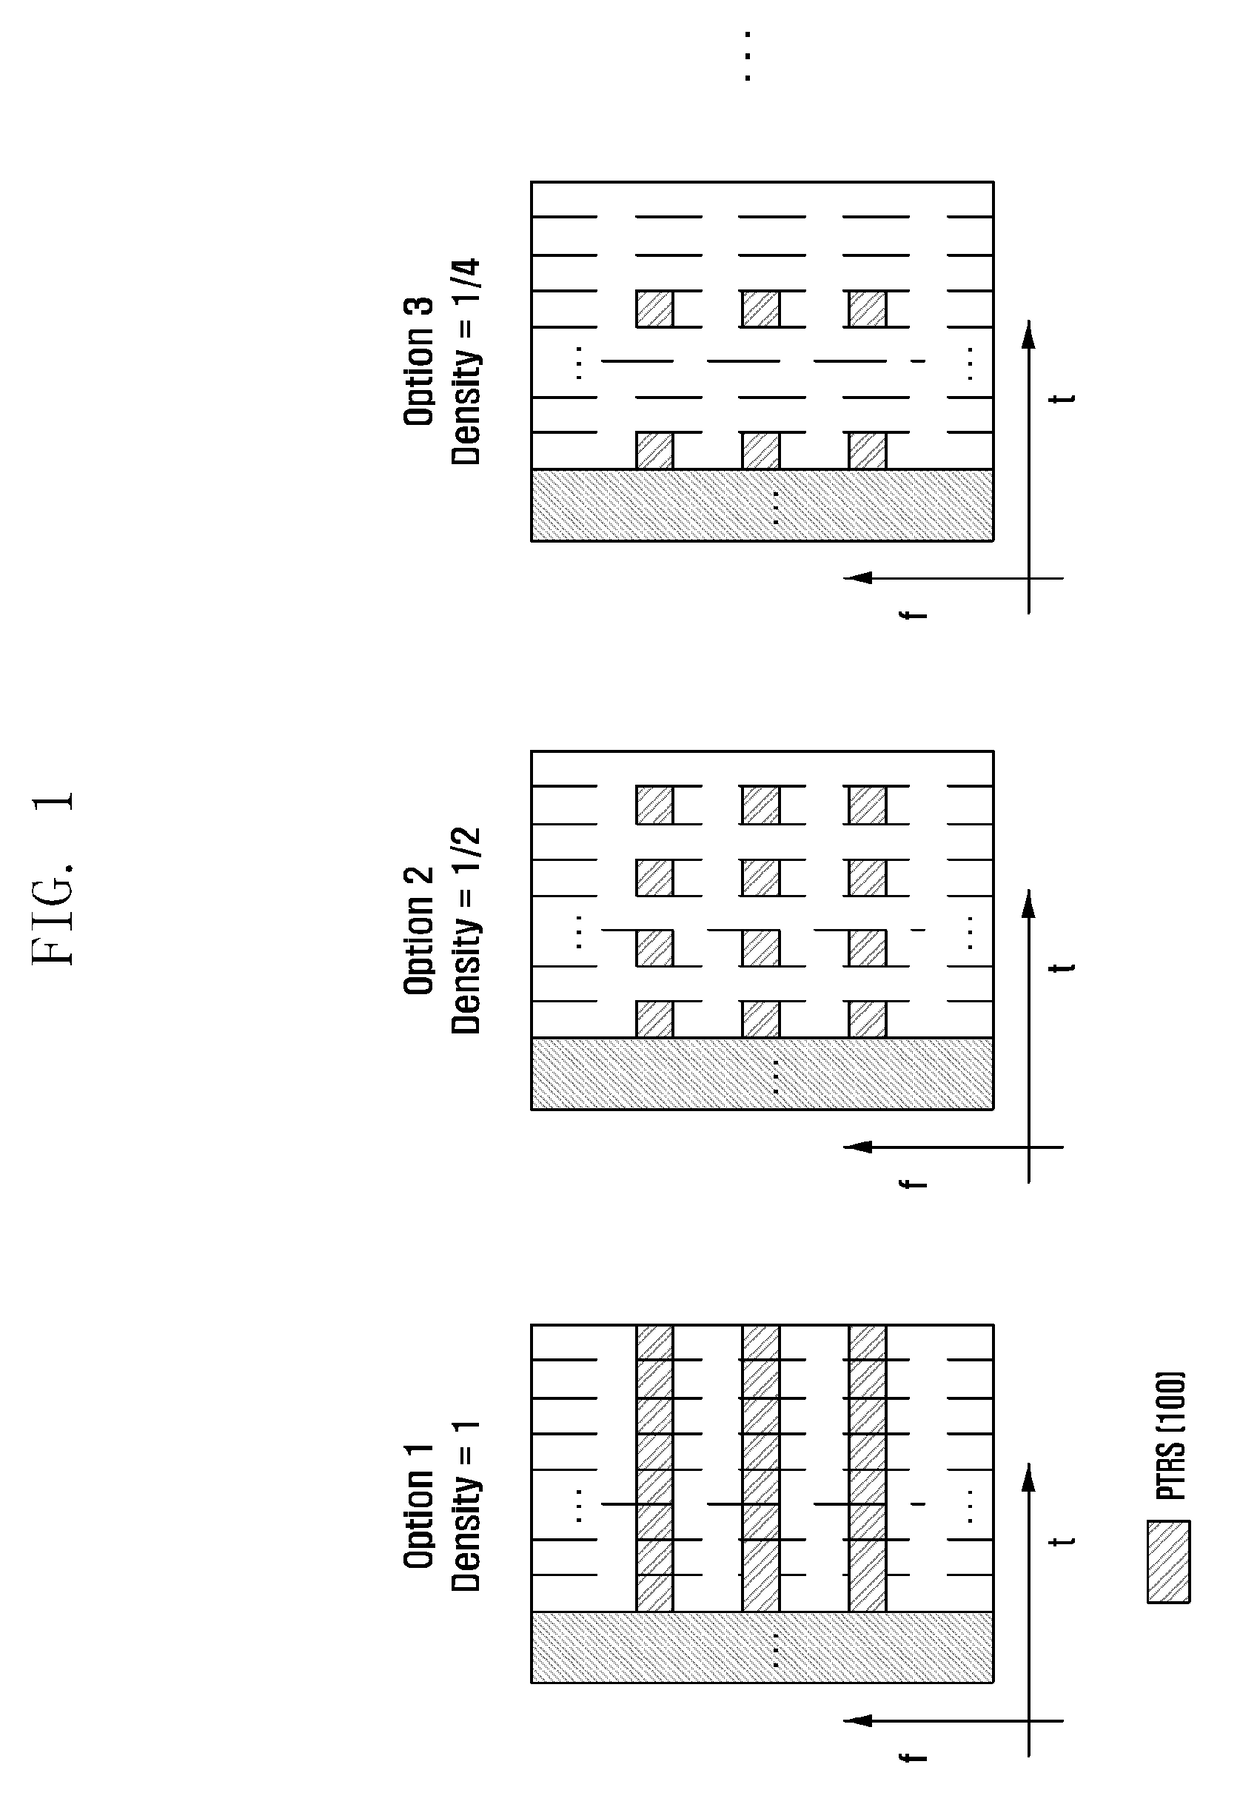 Apparatus and method for effective ptrs operation and indication in wireless communication system